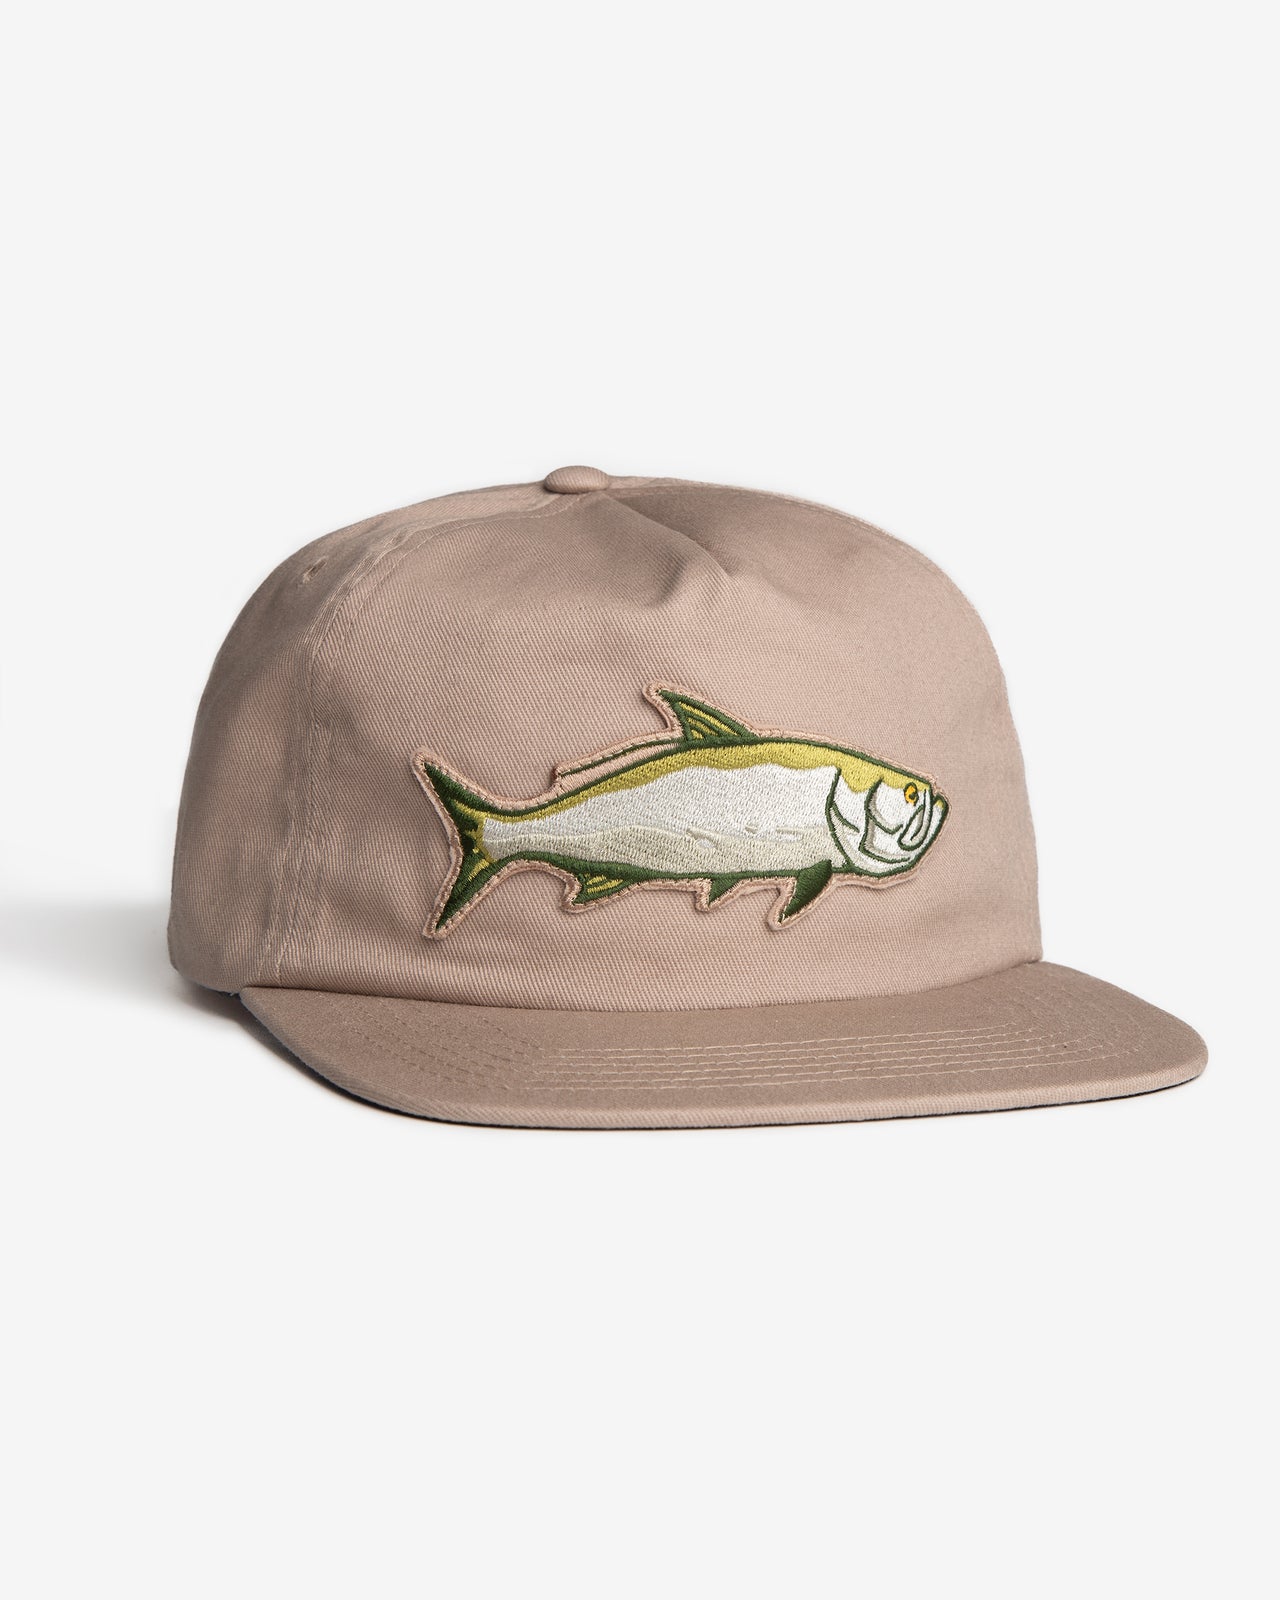 Angled front view of the Jigalode "Tarpon" Snapback fishing hat. The hat is a tan/khaki unstructured flat brim with a large tarpon patch in the front.